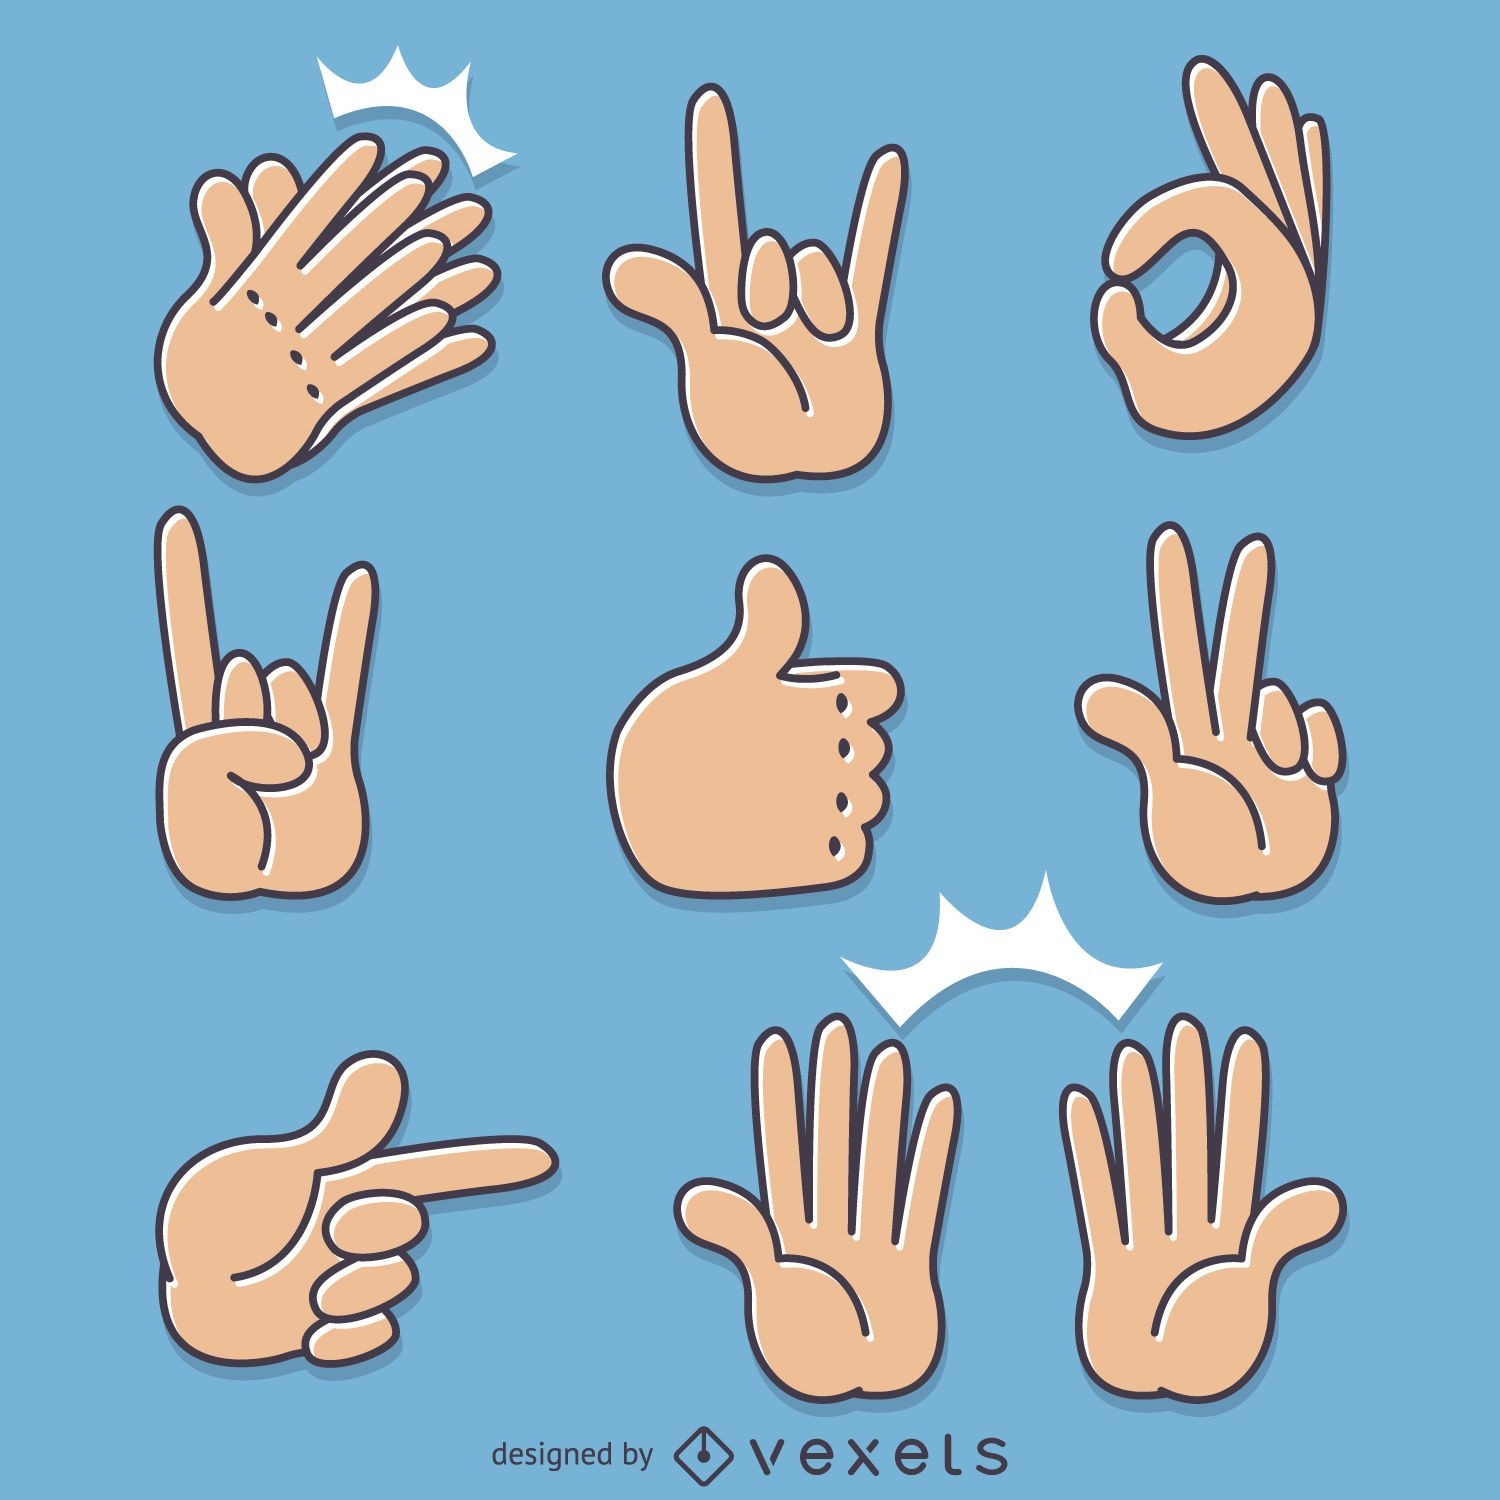 Hand signs gestures illustrations